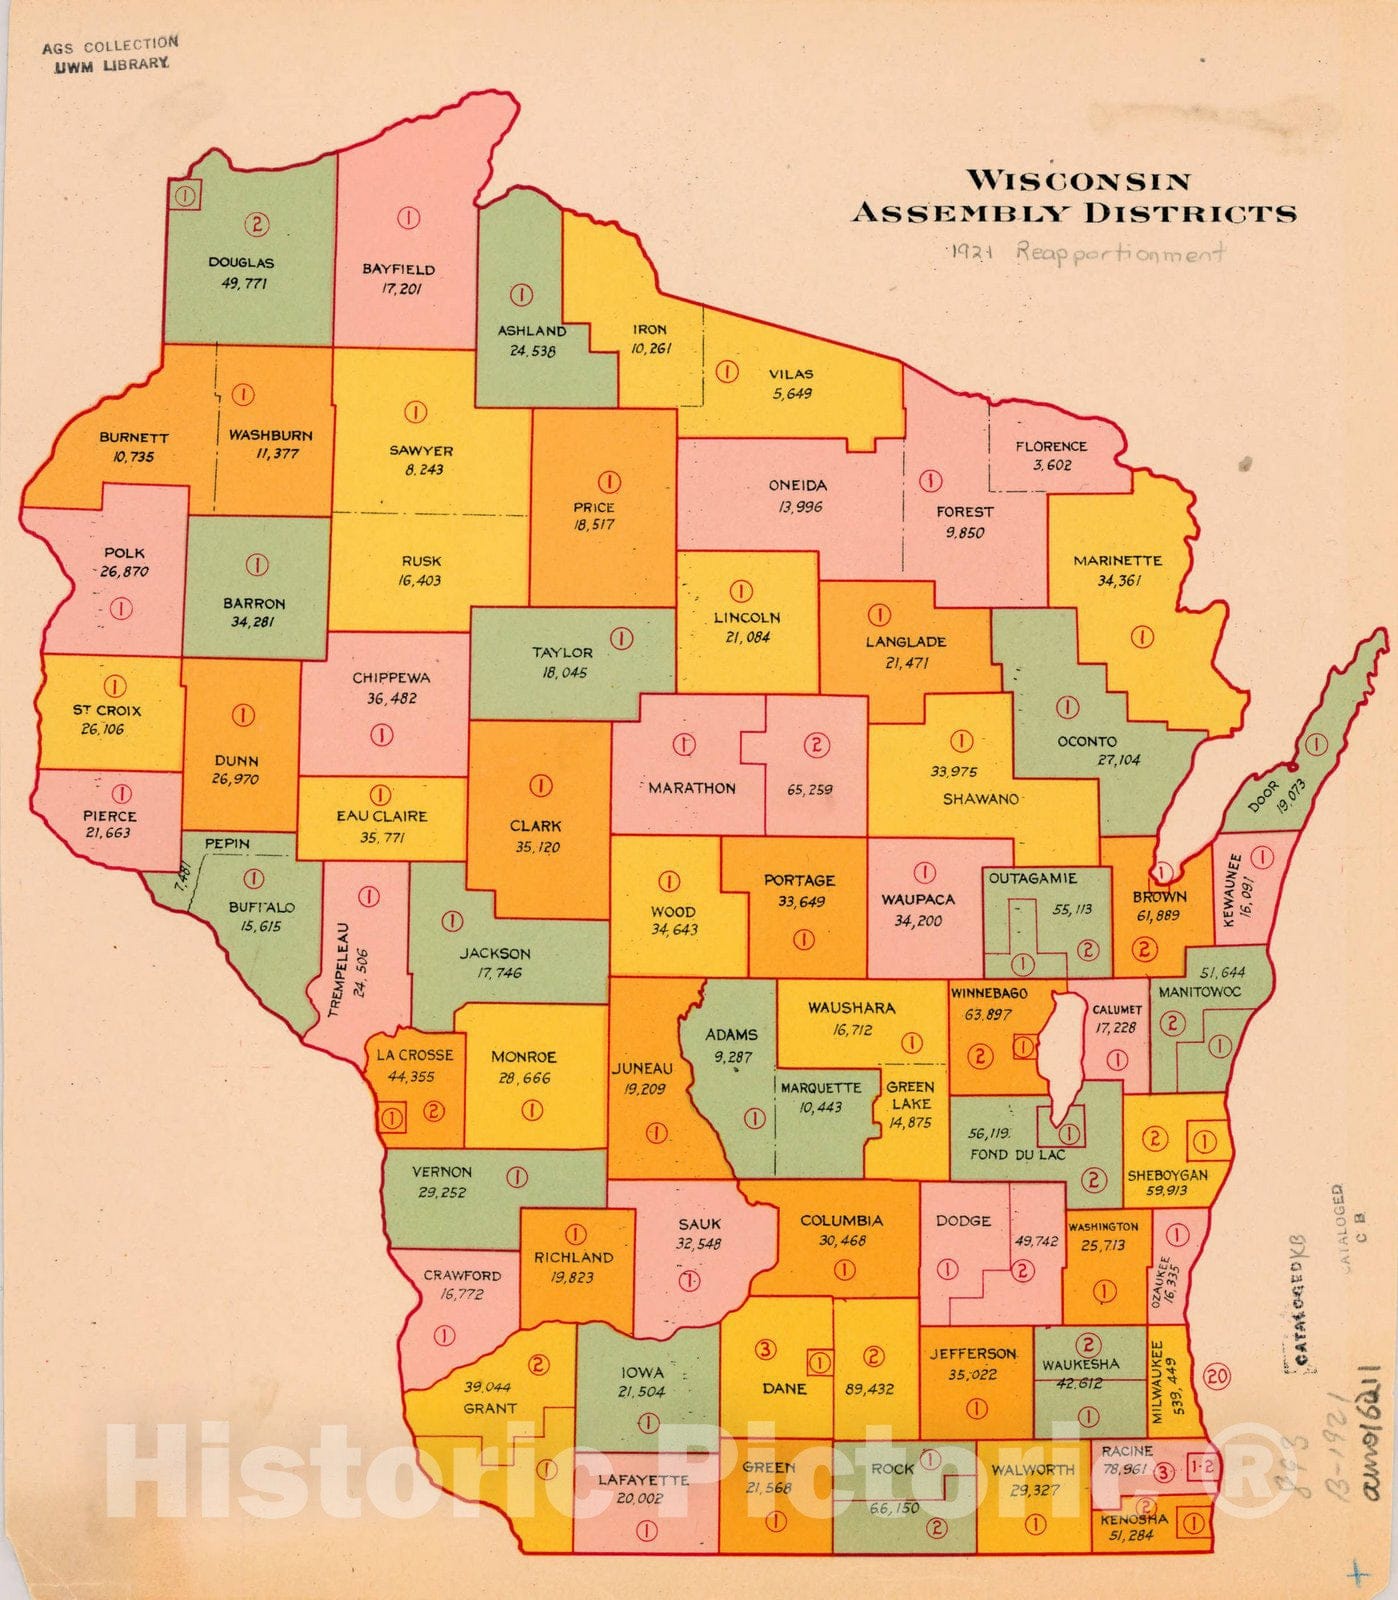 Map Wisconsin 1921, Wisconsin assembly districts [1921 reapportion